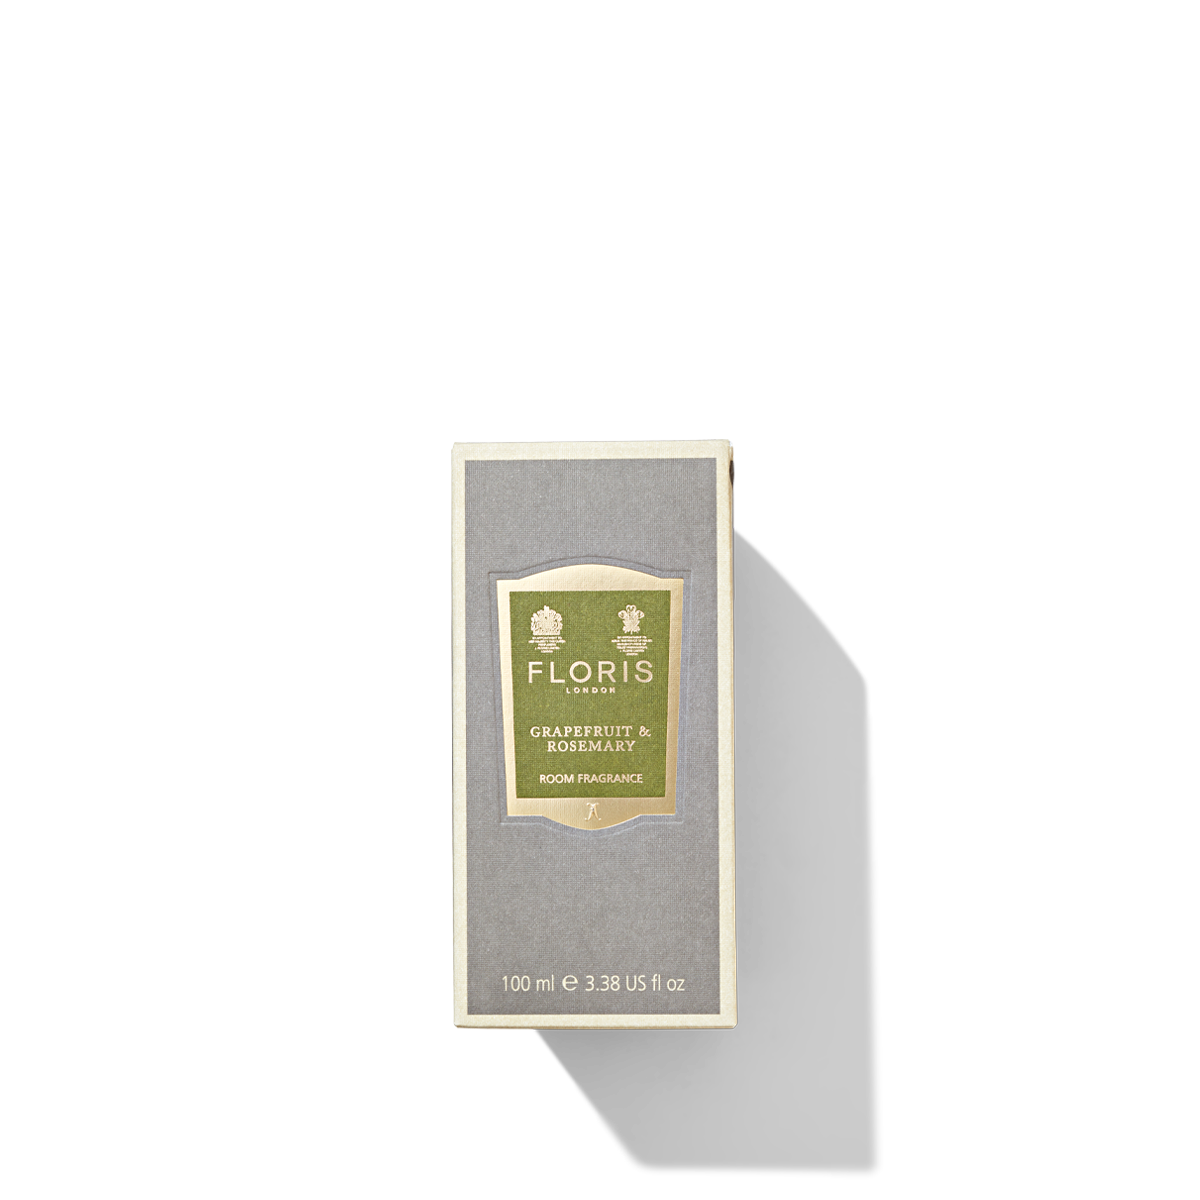 Grey packaging box with gold and green label for the grapefruit and rosemary room fragrance.